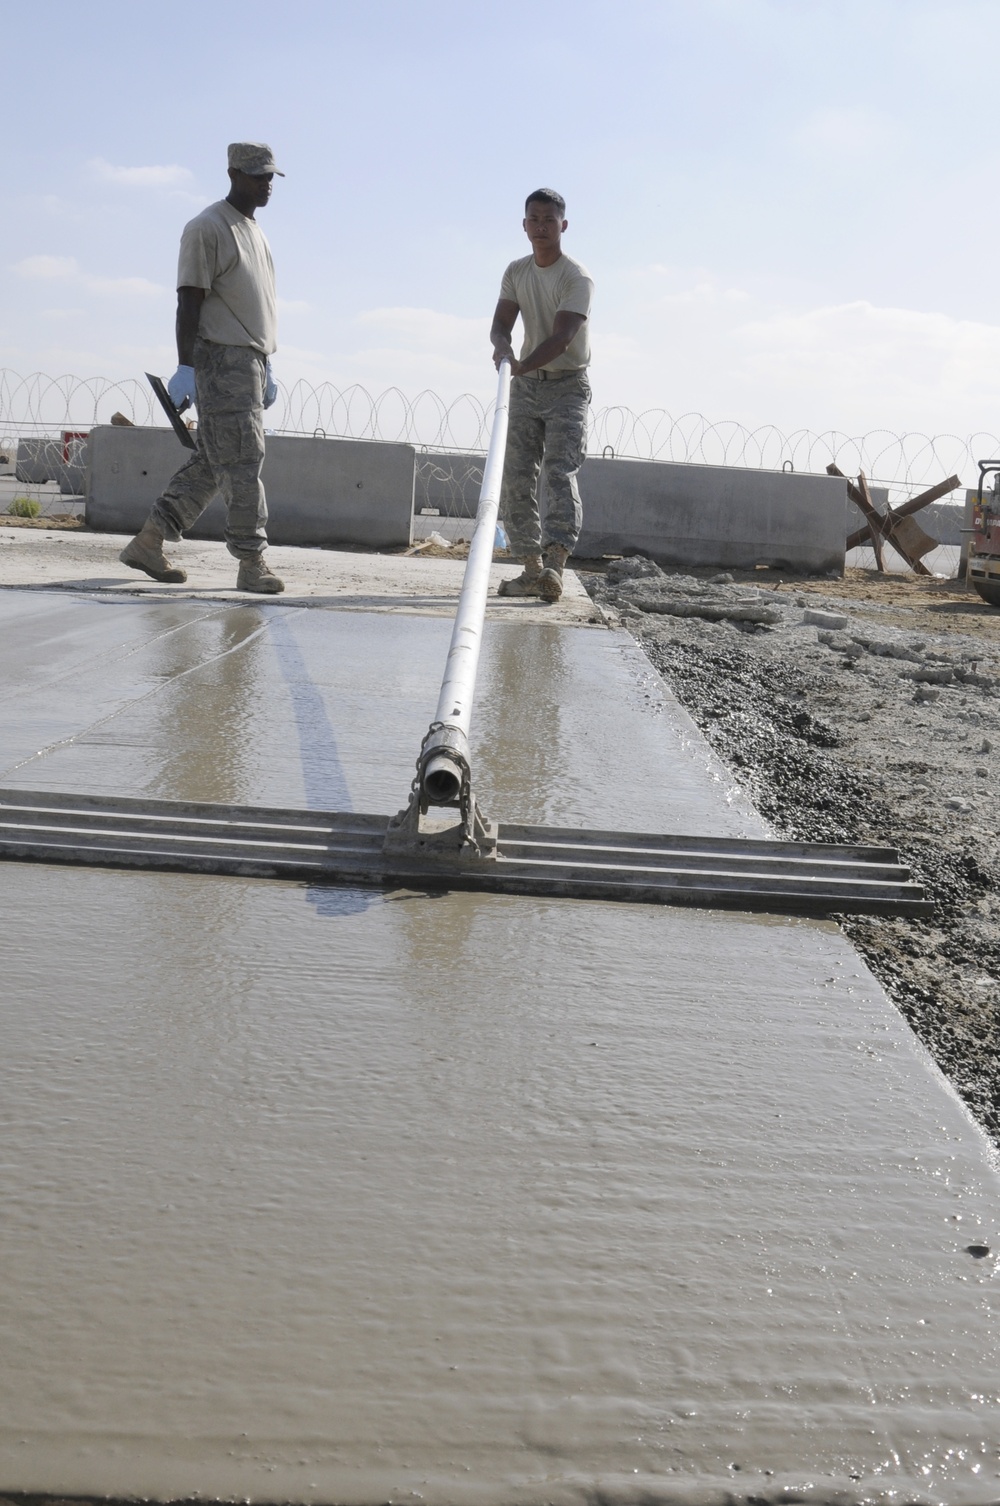 Concrete Laid for Further Development